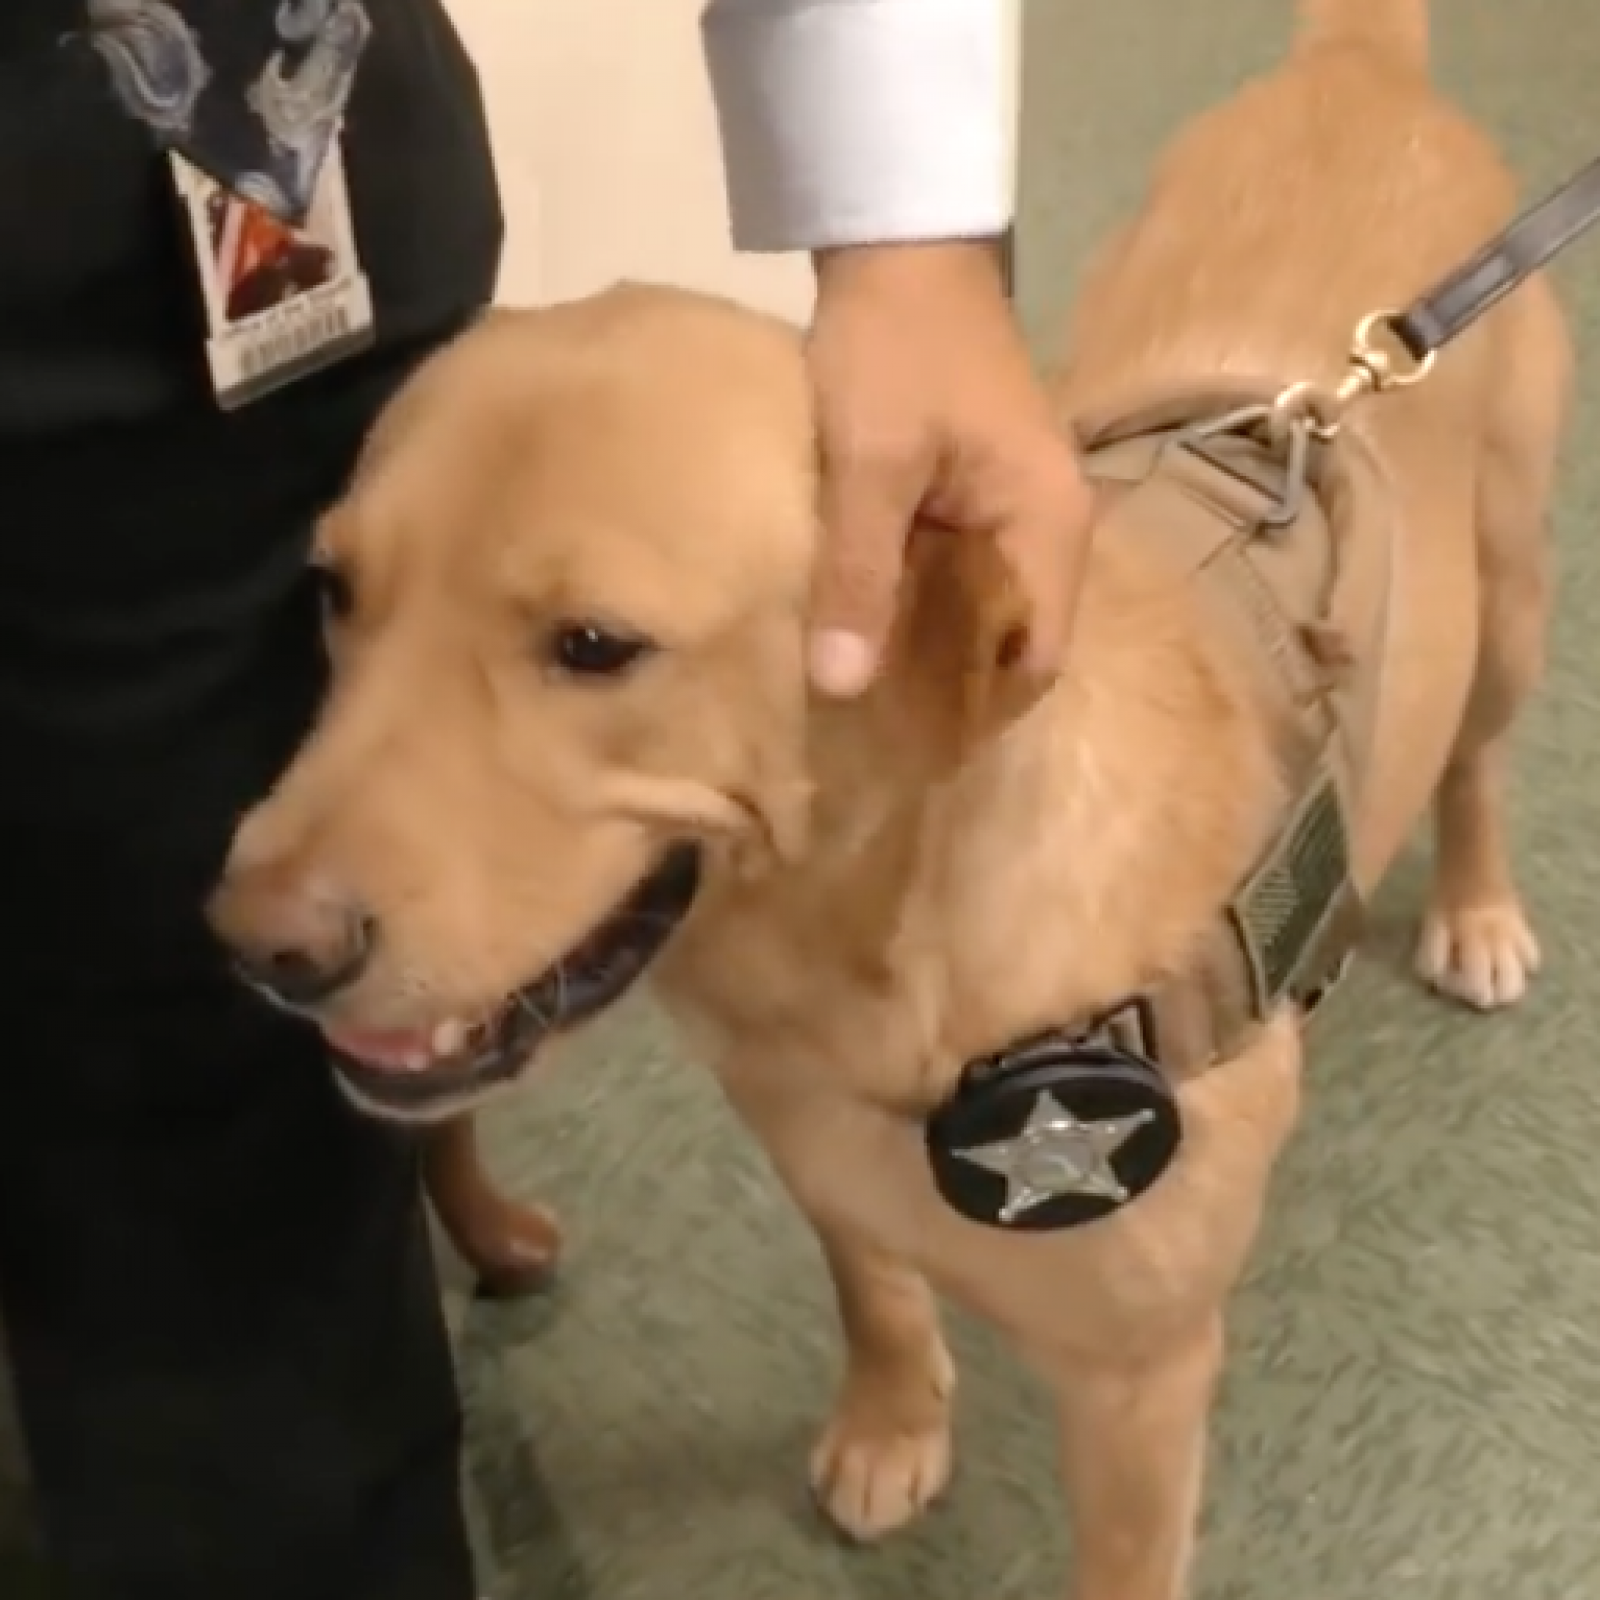 Dogs Porn - Florida Police Dog Trained to Sniff Out Child Porn on ...